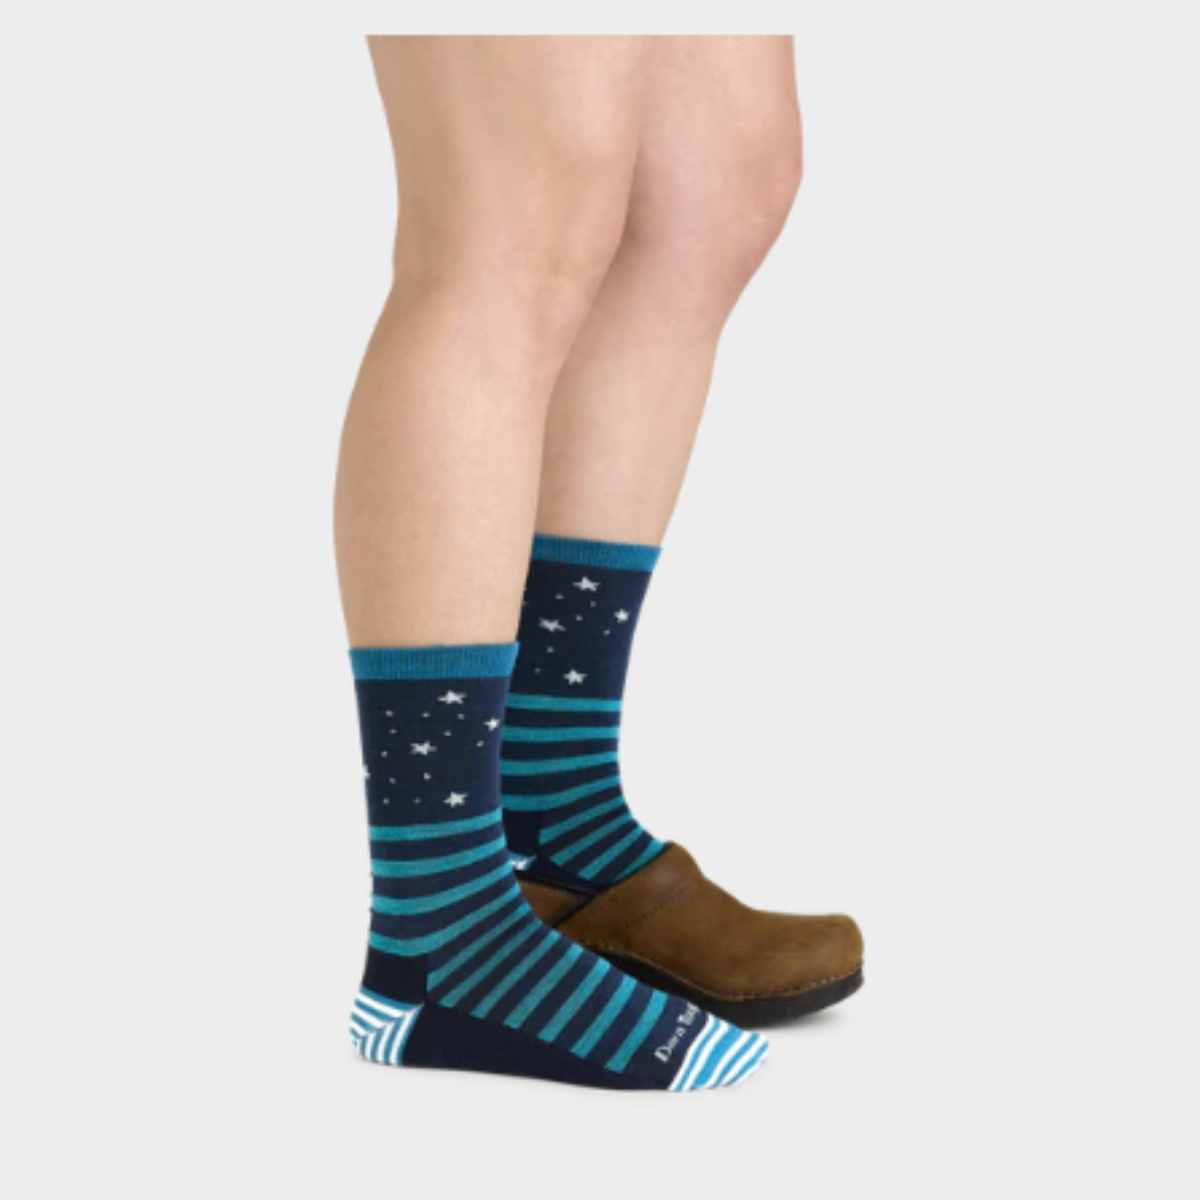 Darn Tough 6037 Animal Haus Lightweight Cushion Crew women&#39;s sock featuring navy blue sock with teal stripes and stars at top. Sock shown on model wearing one shoe. 